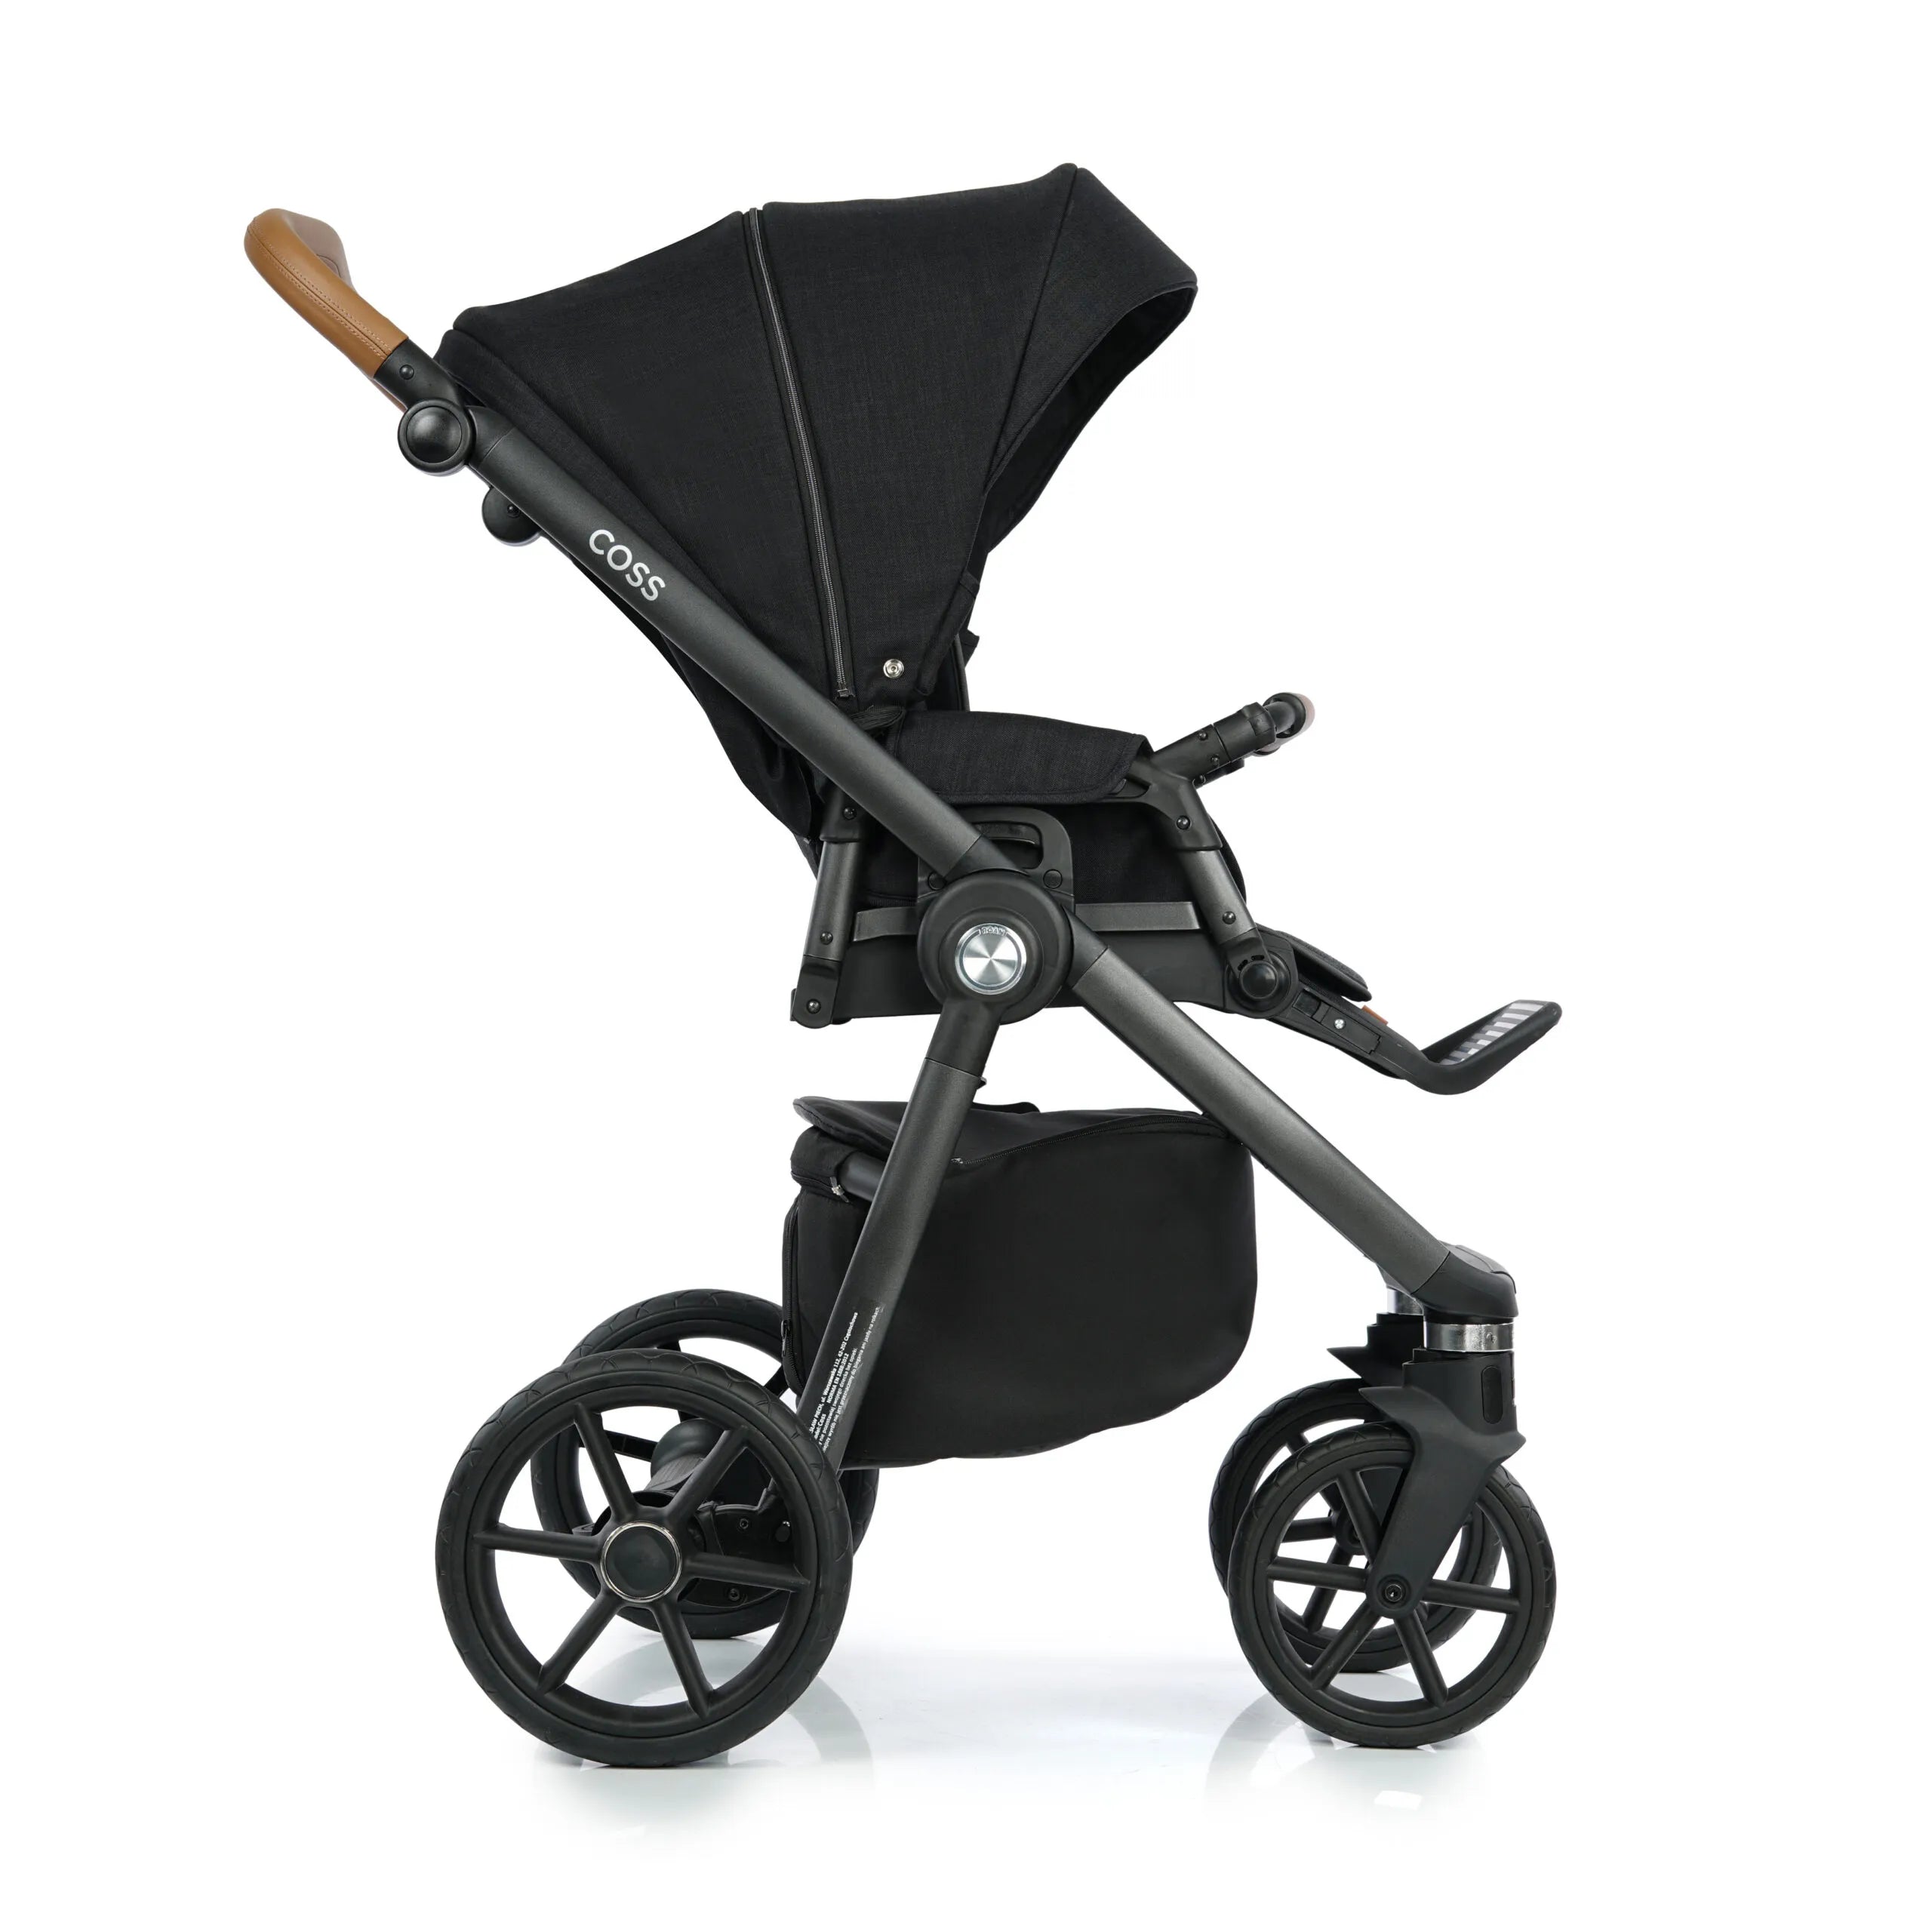 Roan COSS baby stroller carry cot and stroller, color Night Trip